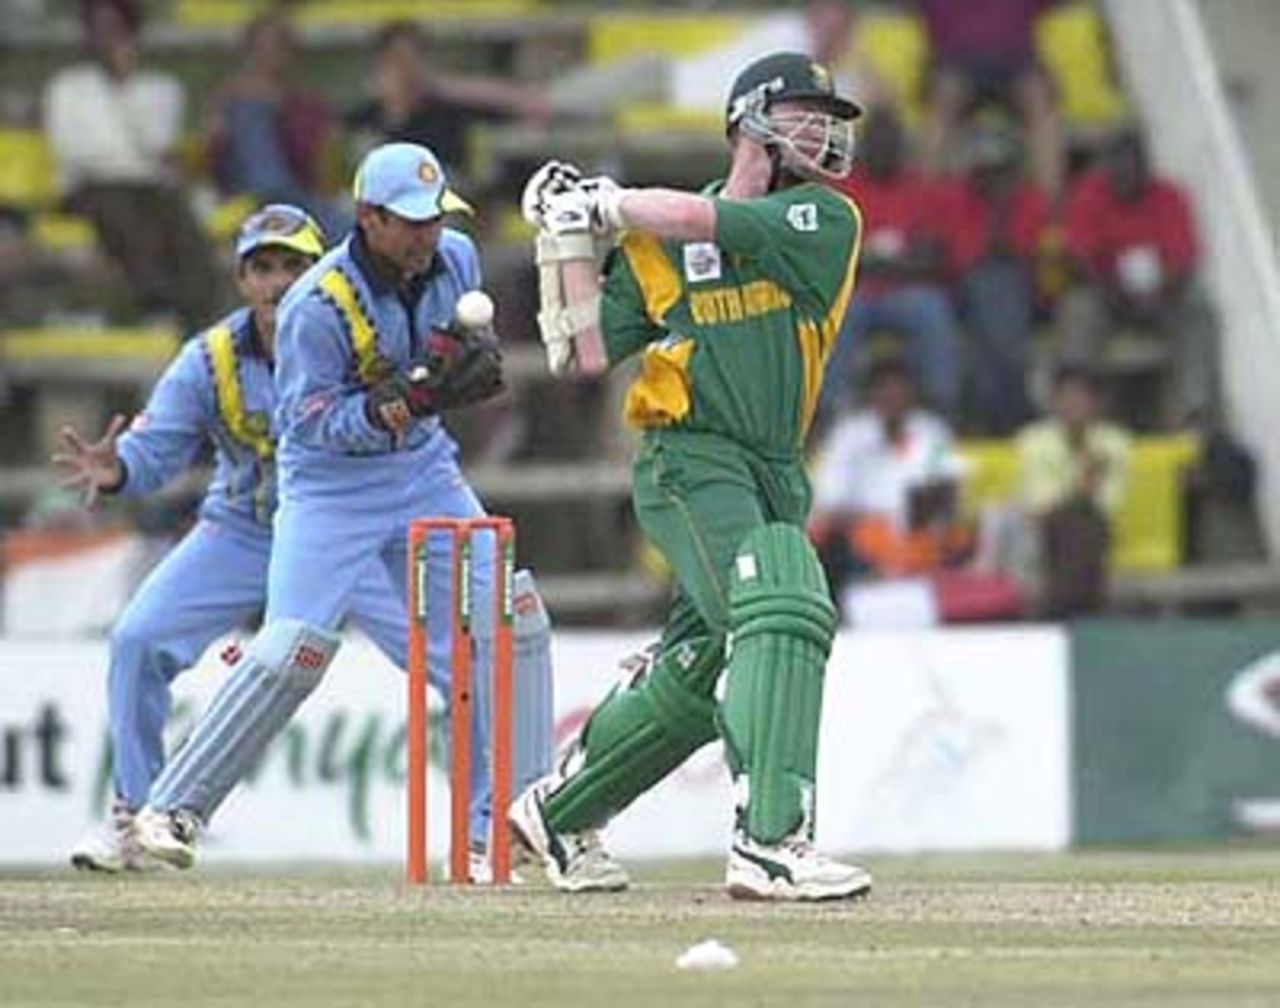 Dahiya in the process of pouching Klusener's nick. ICC KnockOut 2000/01, 2nd Semi Final, India v South Africa, Gymkhana Club Ground, Nairobi, 13 October 2000